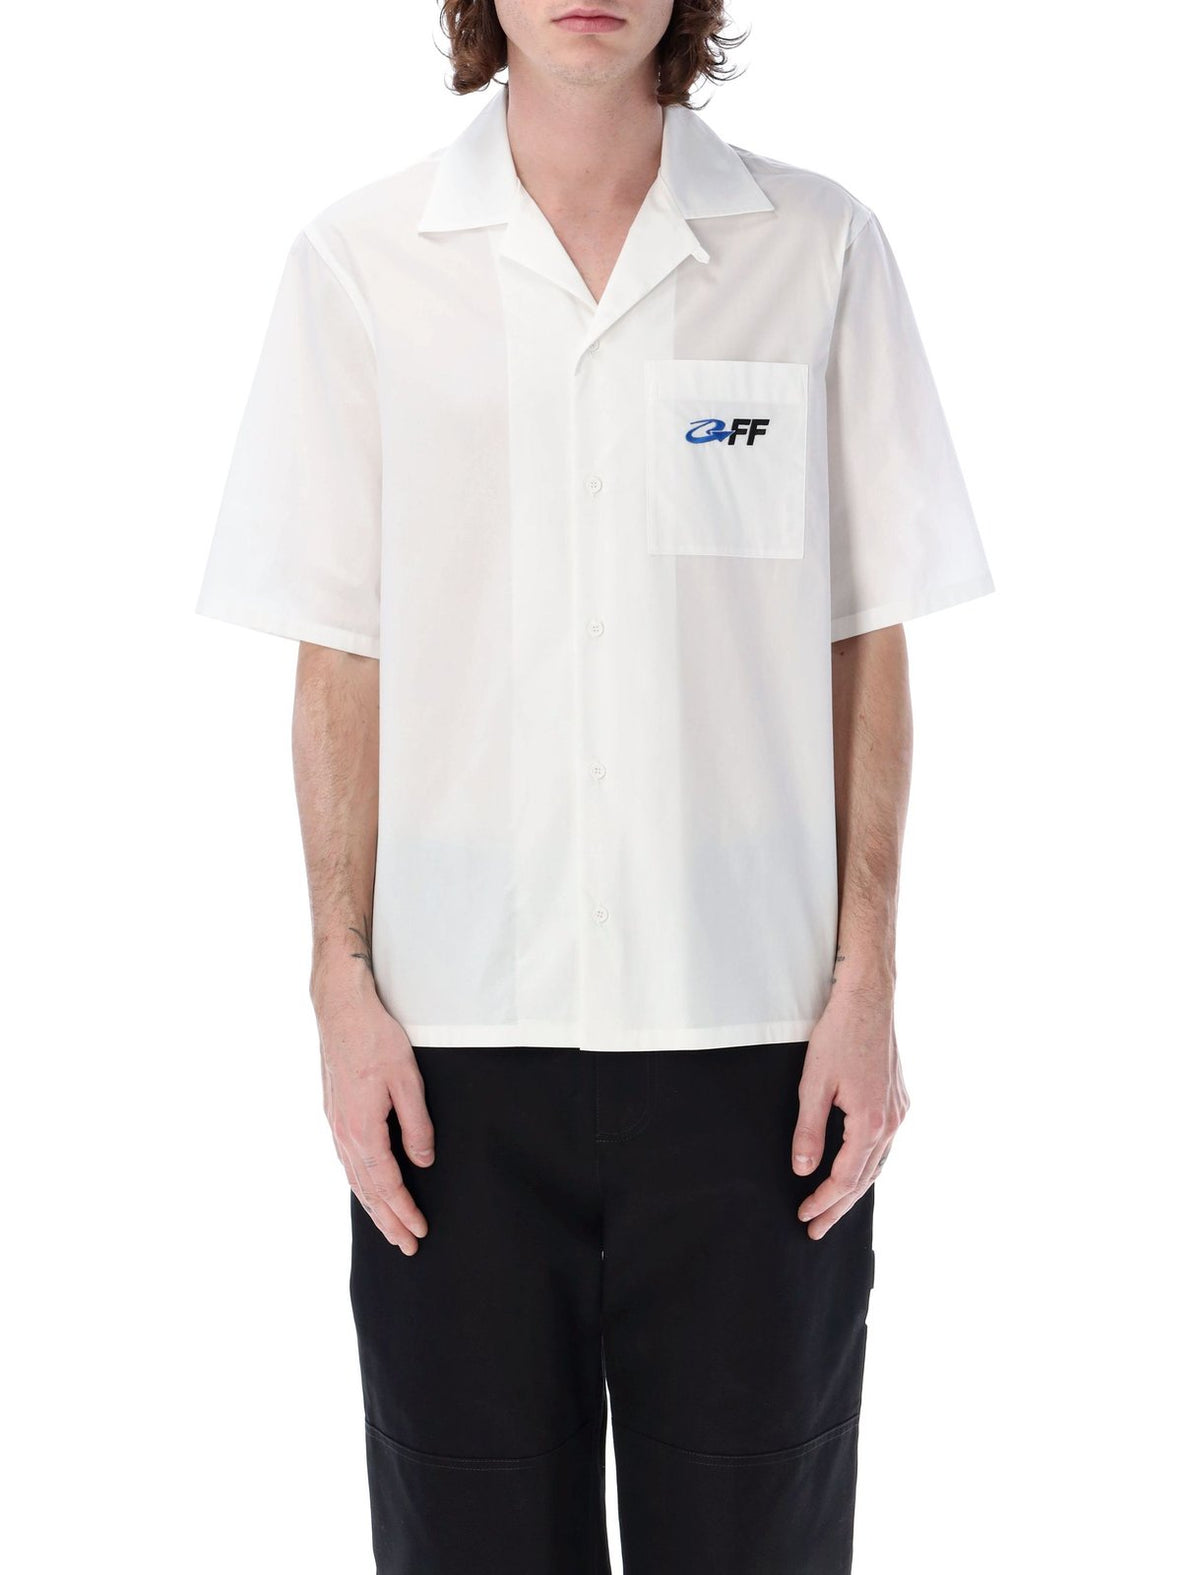 Off-White Exact Opp Holiday Logo Embroidered Shirt